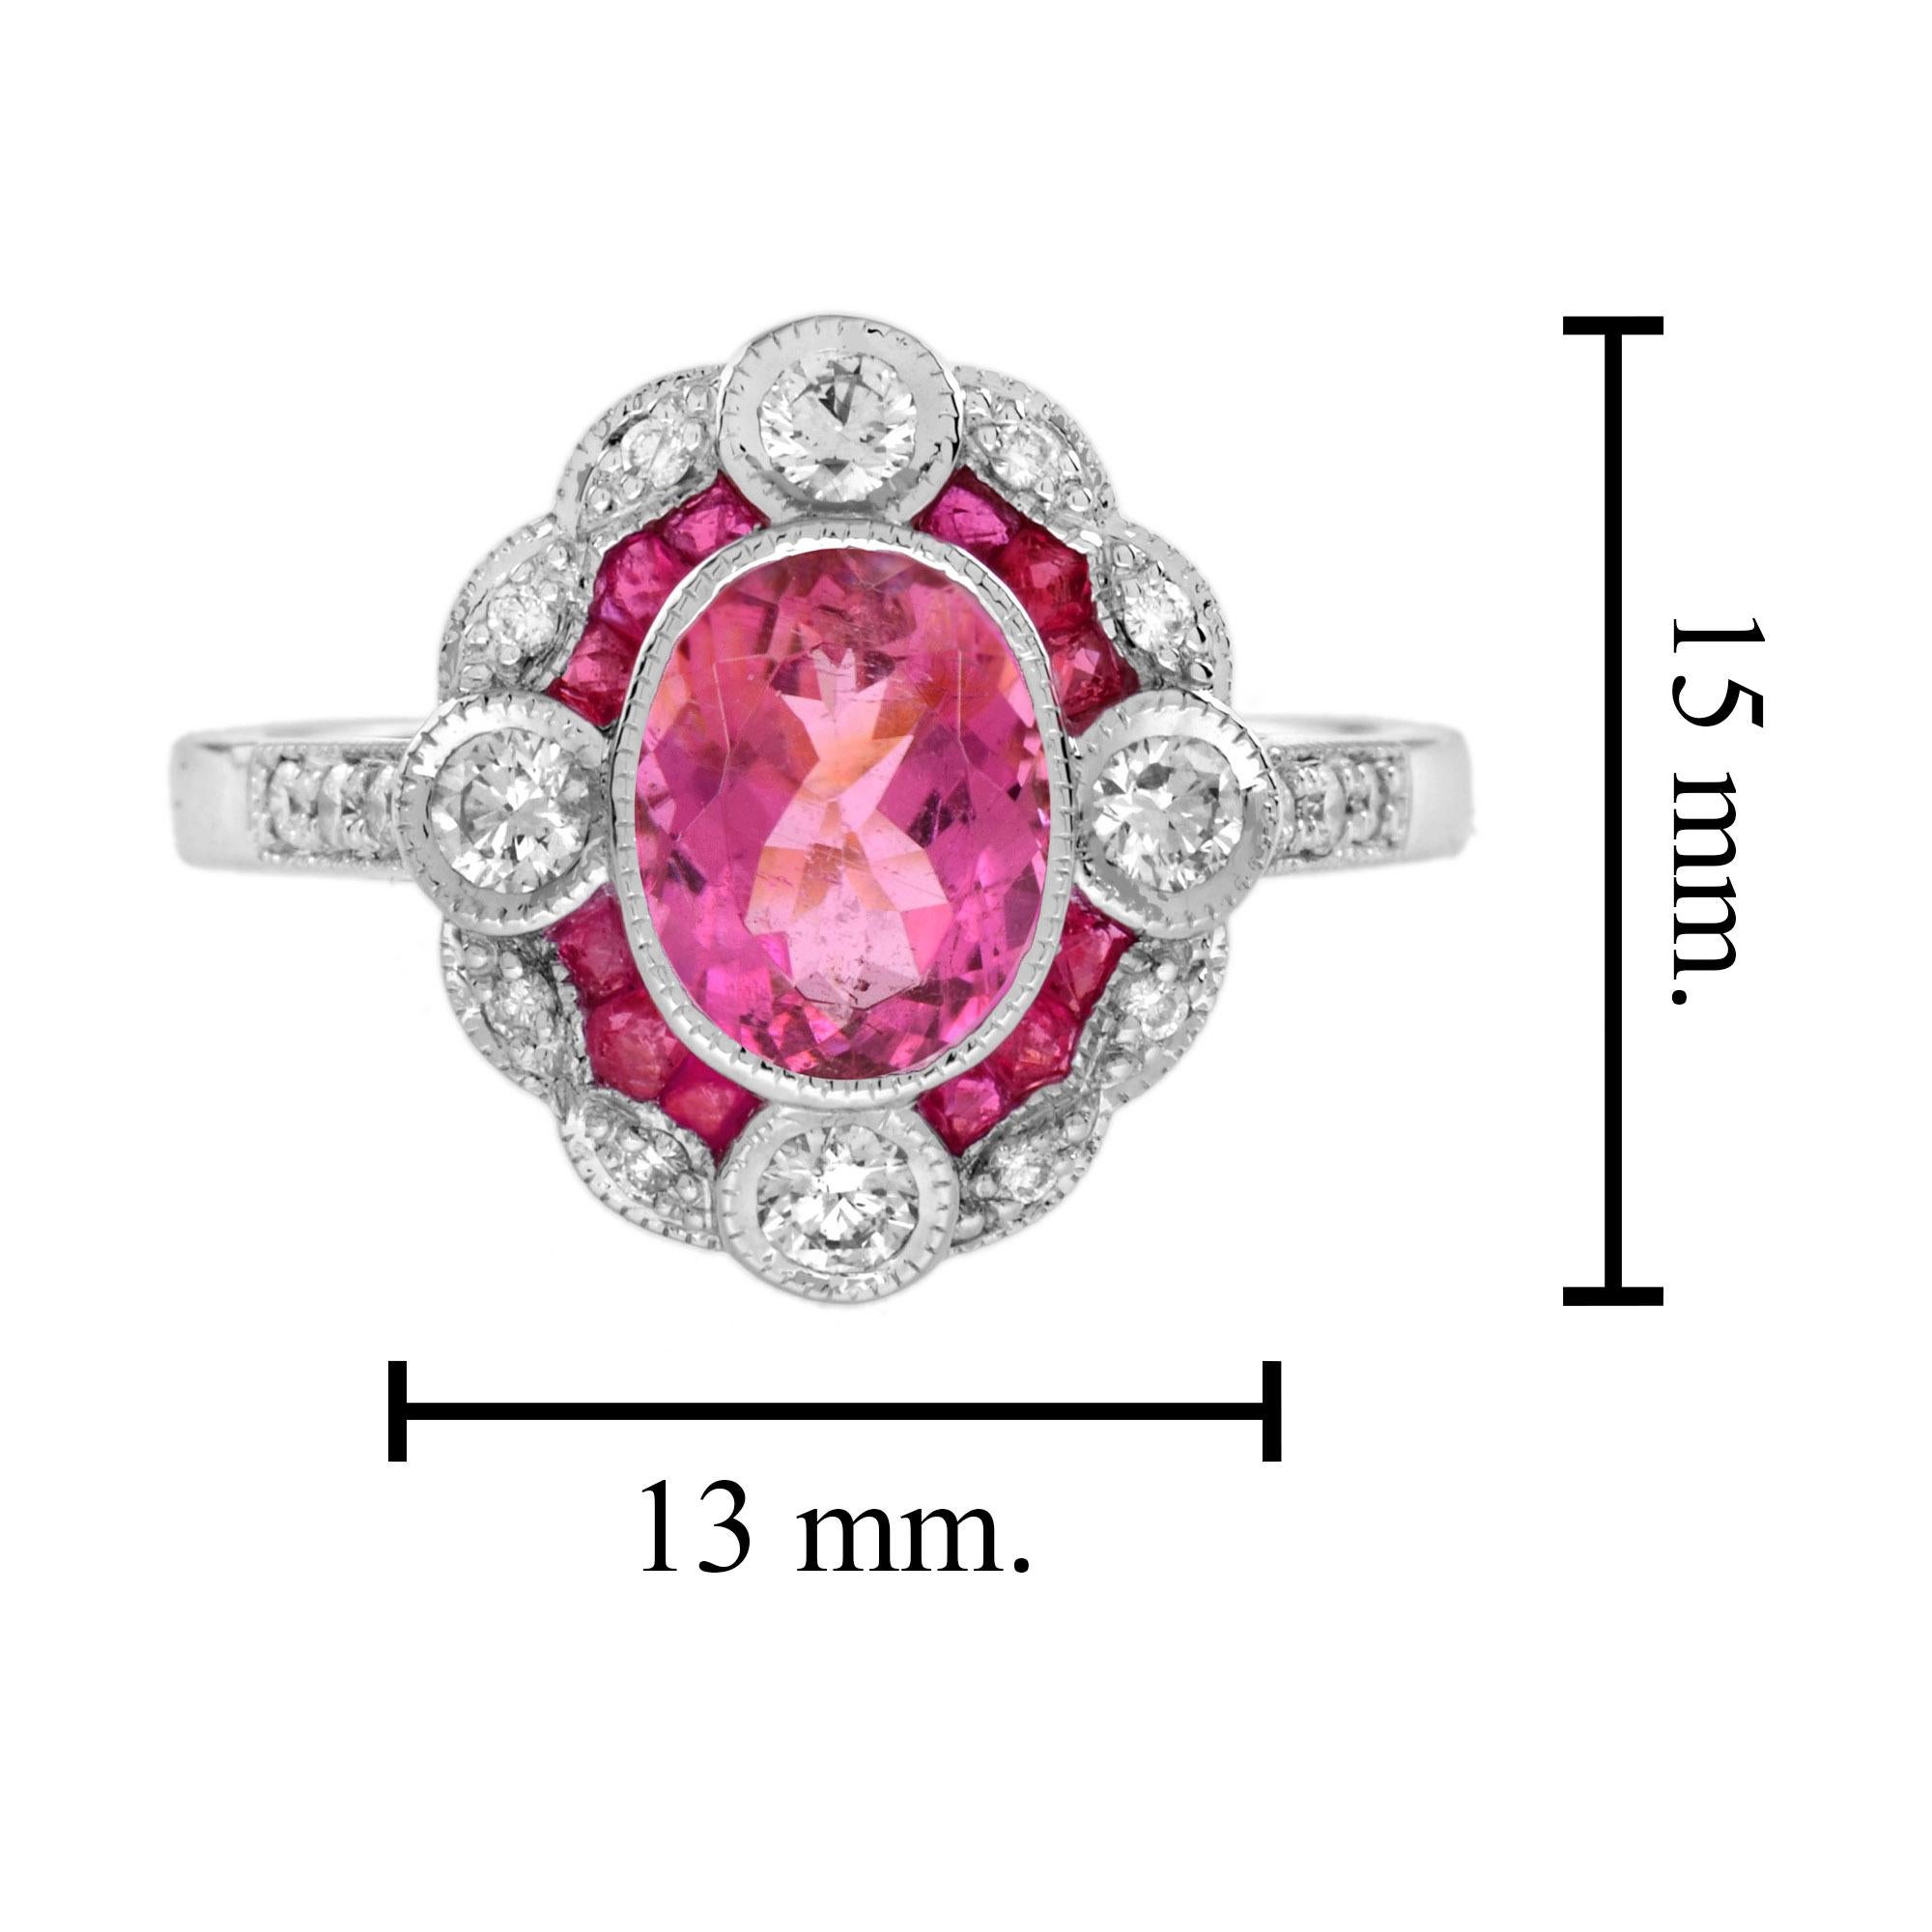 Pink Tourmaline Ruby Diamond Art Deco Style Engagement Ring in 18K White Gold For Sale 2